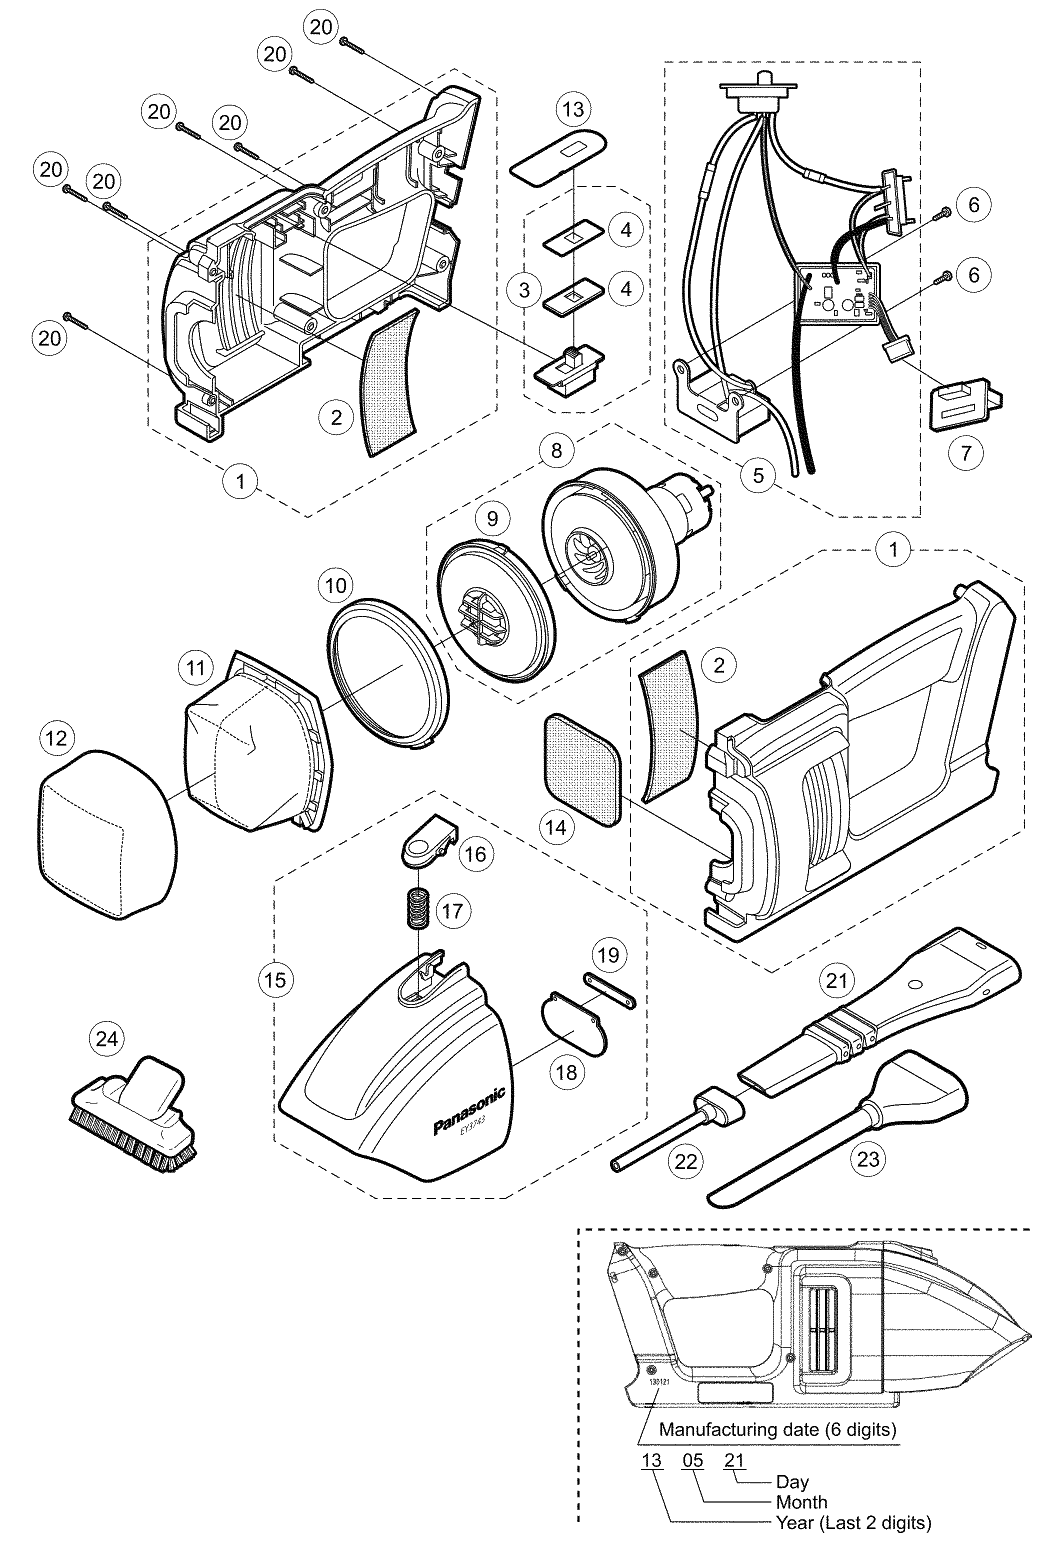 EY3743: Exploded View